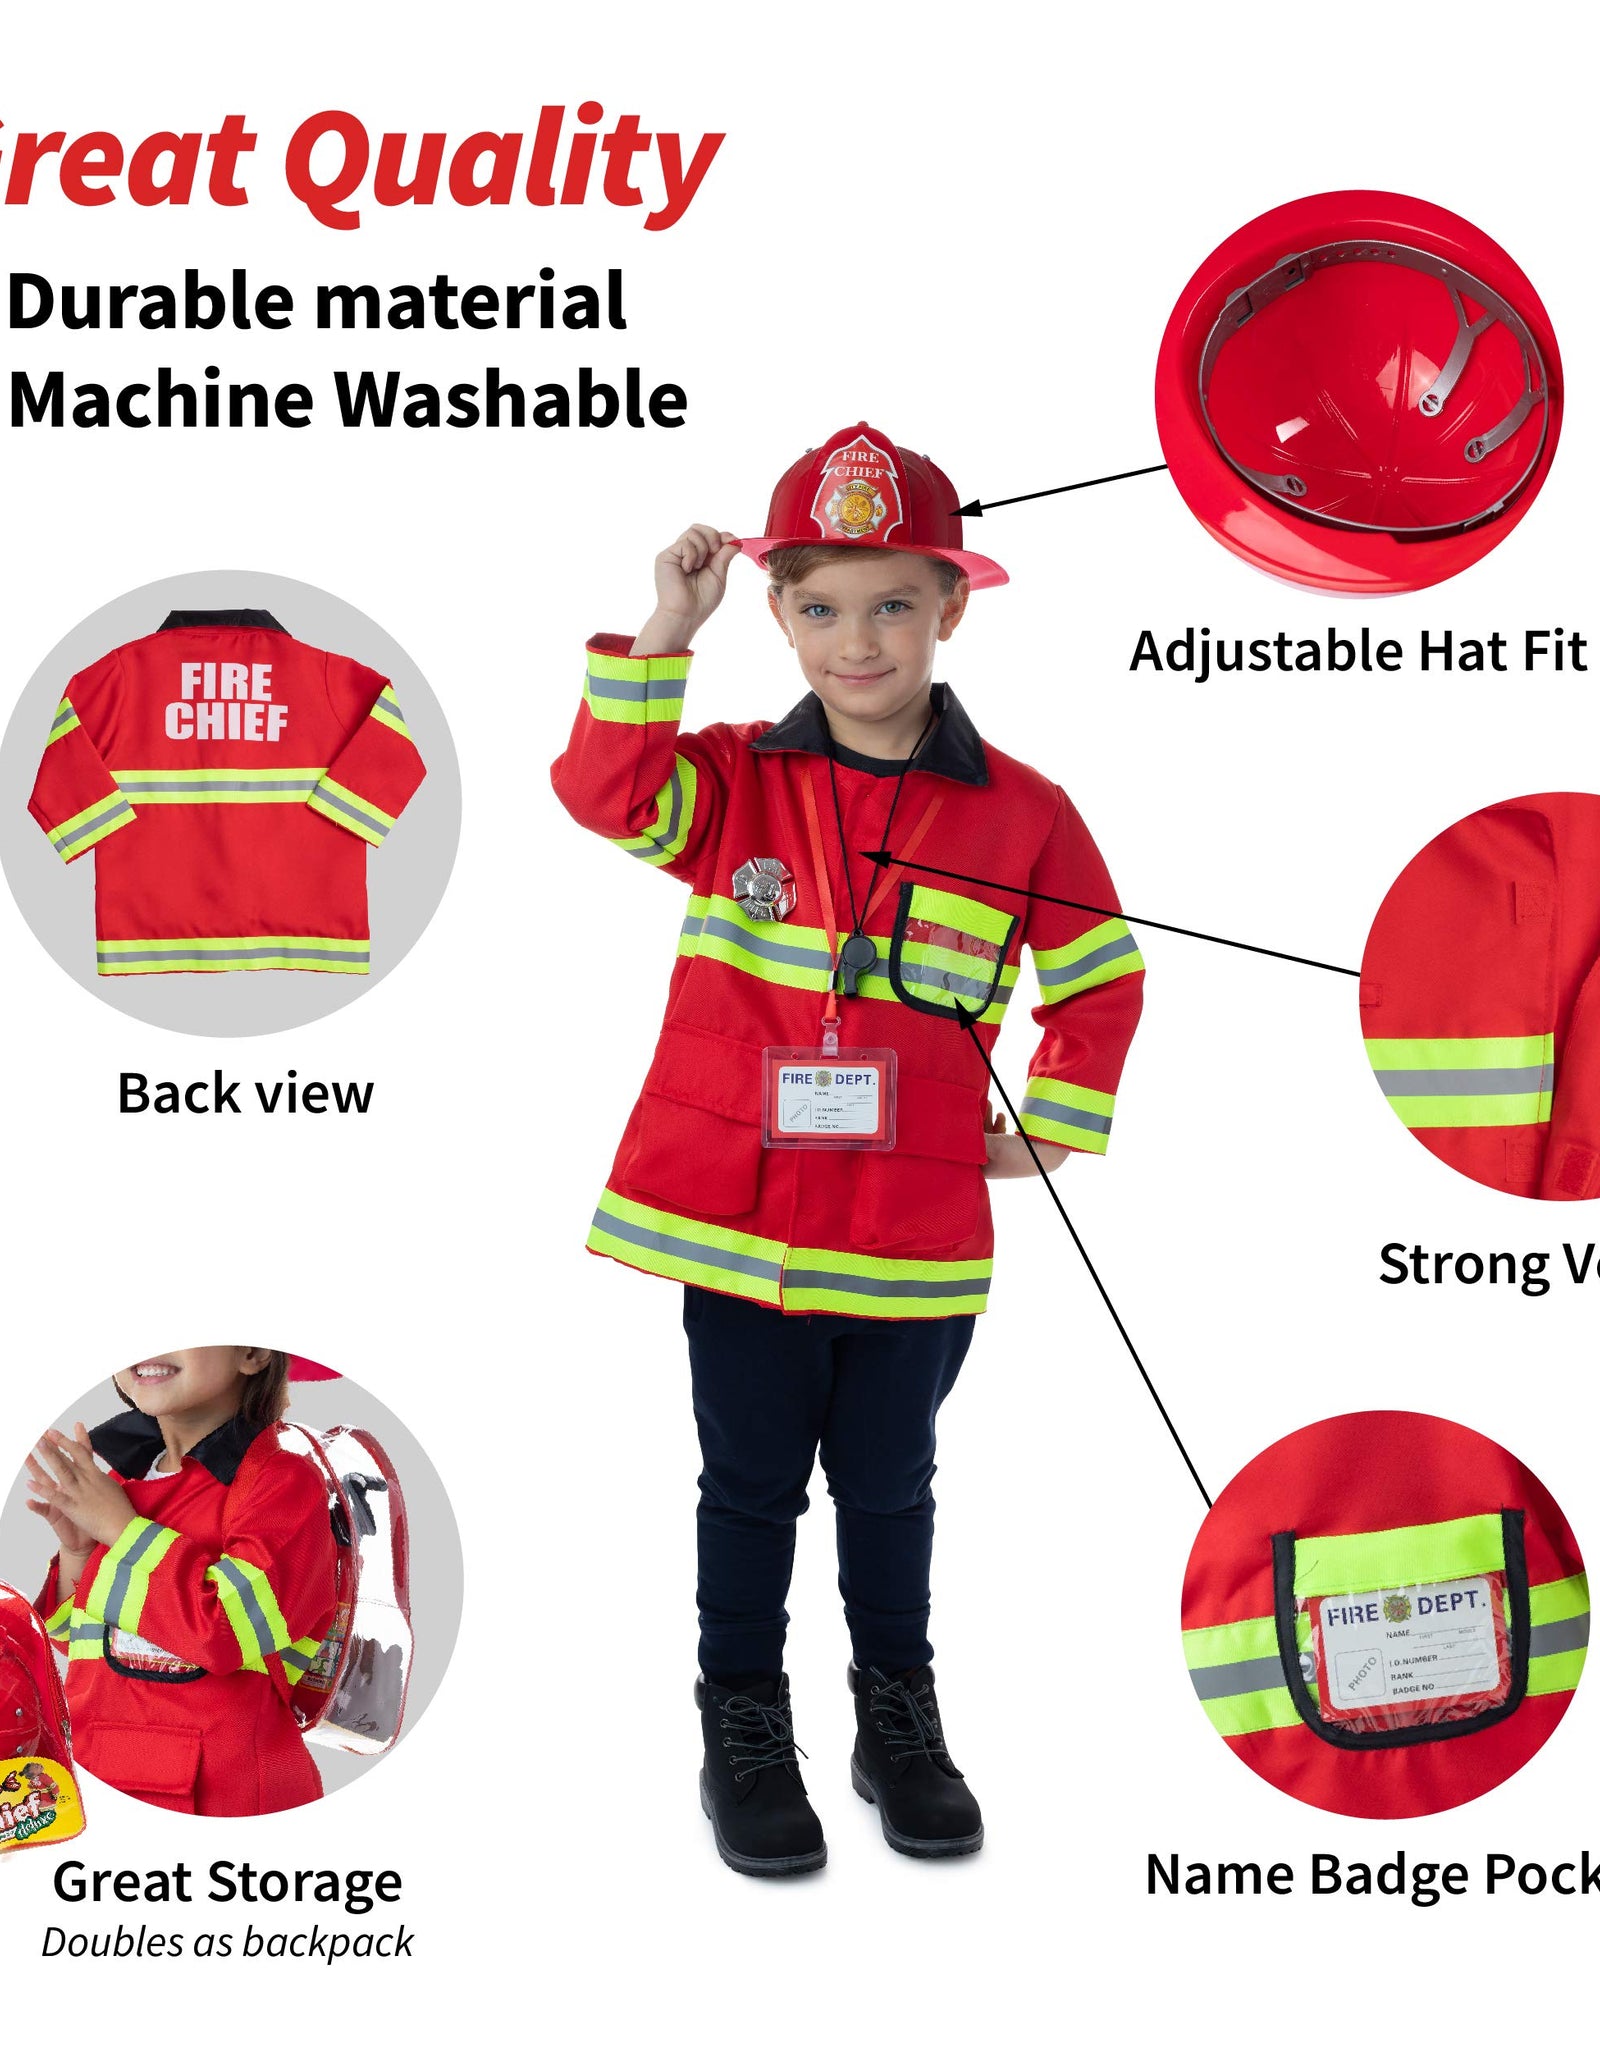 Born Toys 8 PC Premium WASHABLE kids Fireman Costume Toy for kids,Boys,Girls,Toddlers, and children with complete firefighter accessories